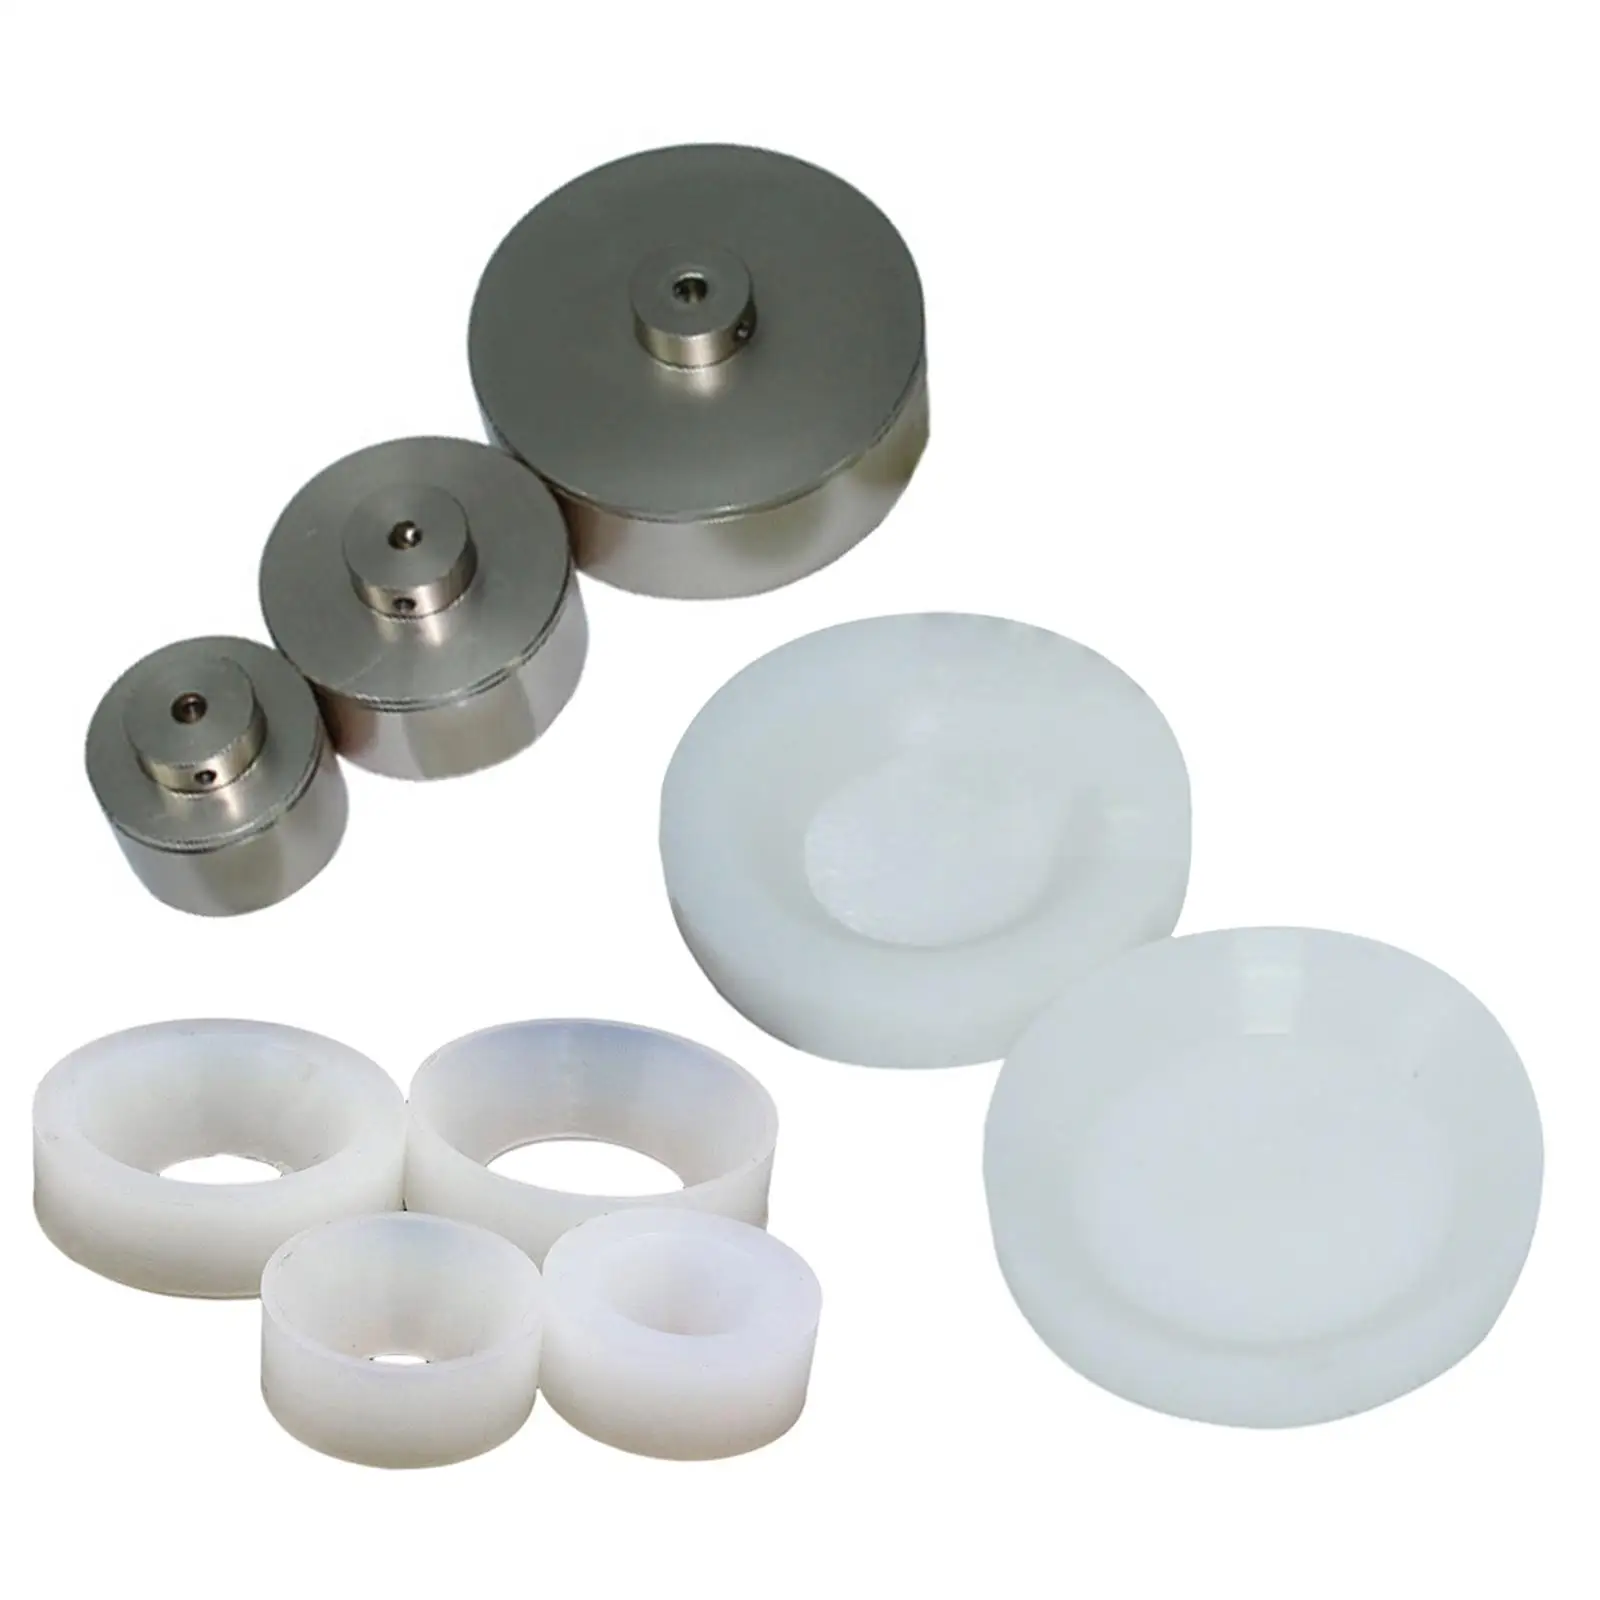 Electric Capping Machine Chucks Silicon Rubber Pads for 10-90mm Plastic Bottles Capper Accessories for Caps Sealer